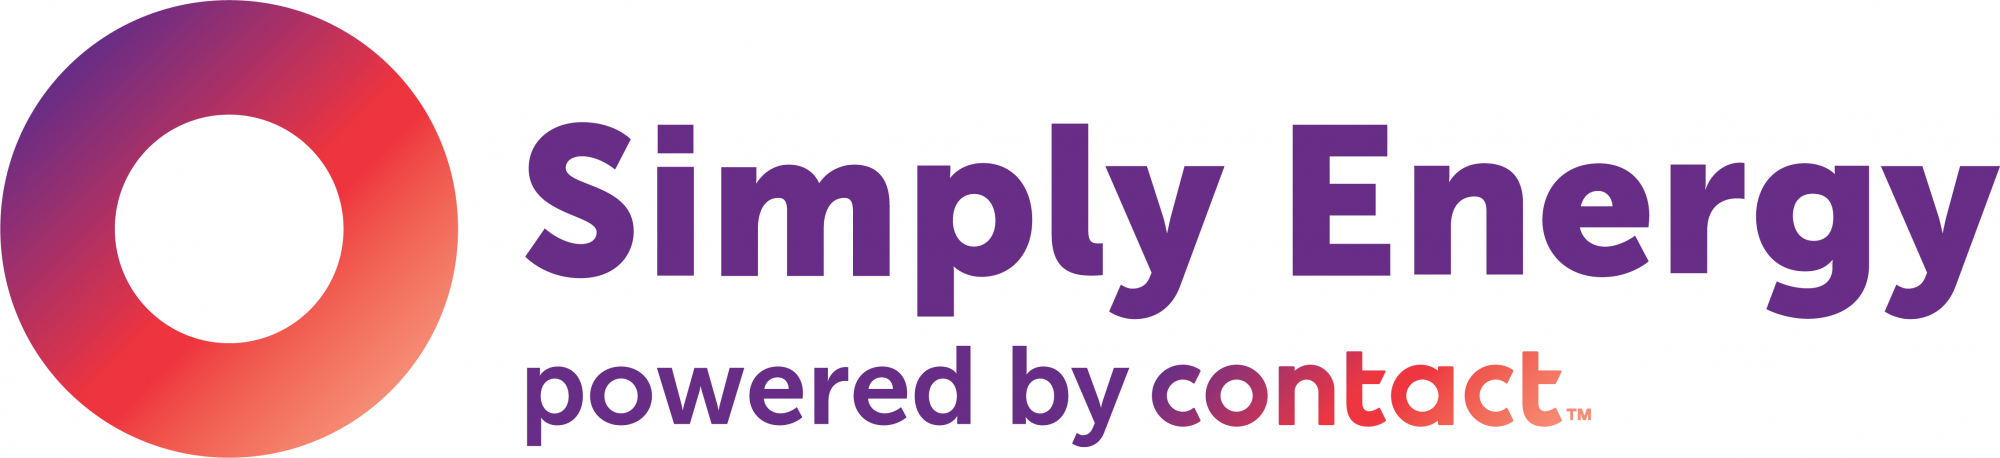 Simply Energy powered by Contact logo